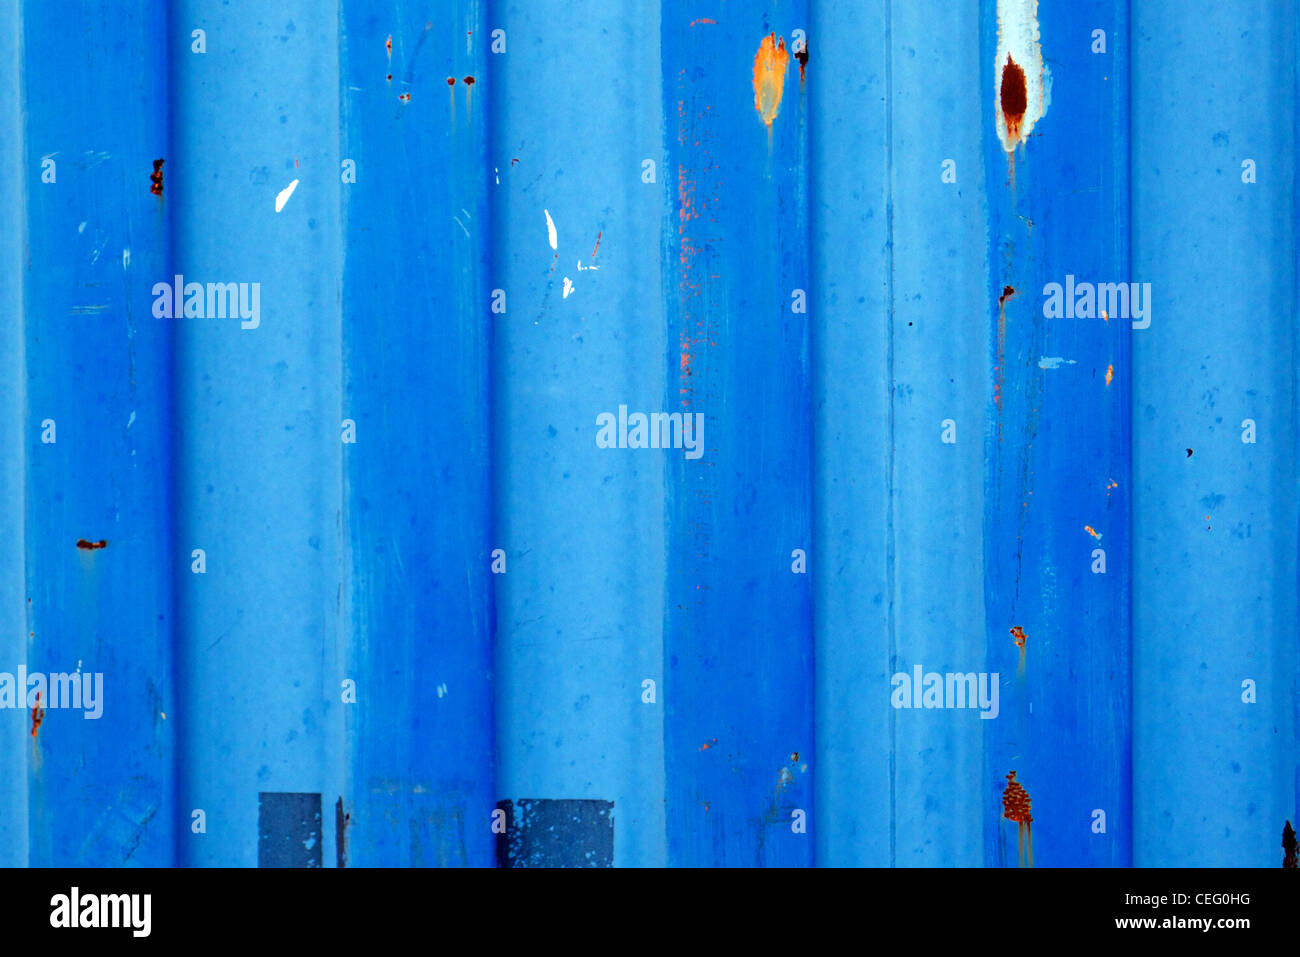 Corrugated metal surface of a shipping container Stock Photo